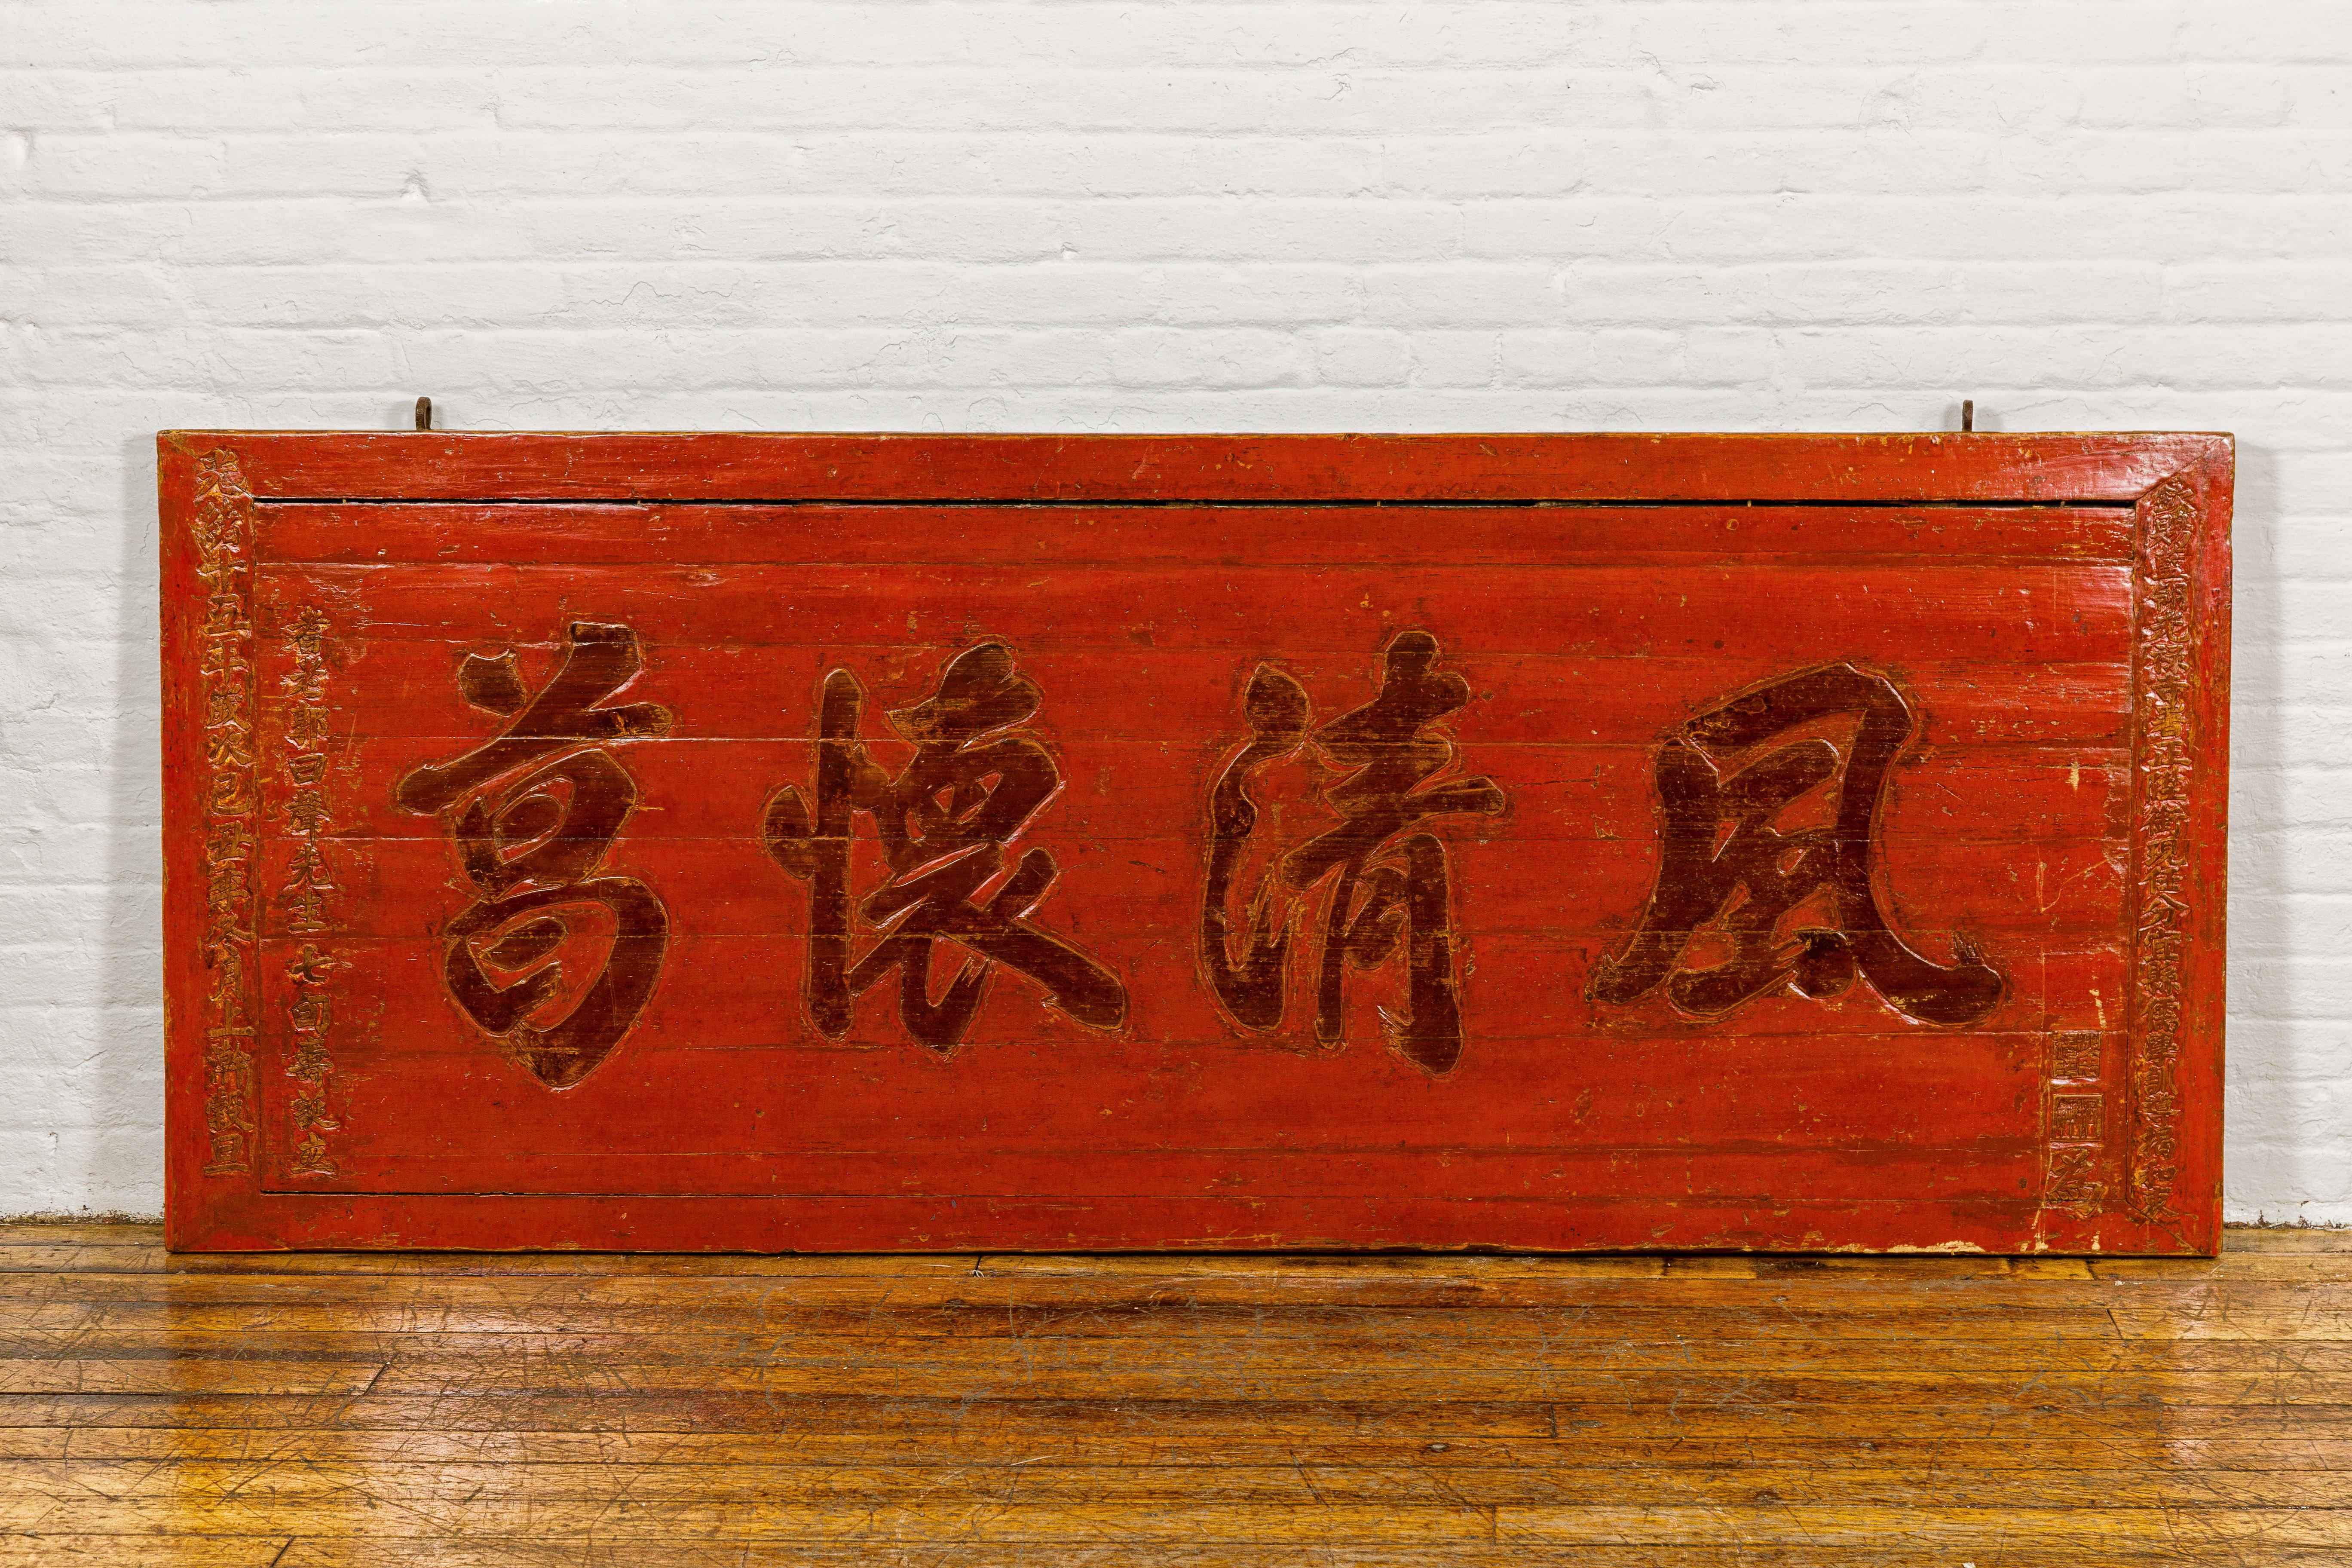 A Chinese Qing Dynasty period red lacquer shop sign from the 19th century with carved and lacquered calligraphy. This Chinese Qing Dynasty period shop sign is a remarkable artifact from the 19th century, boasting a vibrant red lacquer that has been